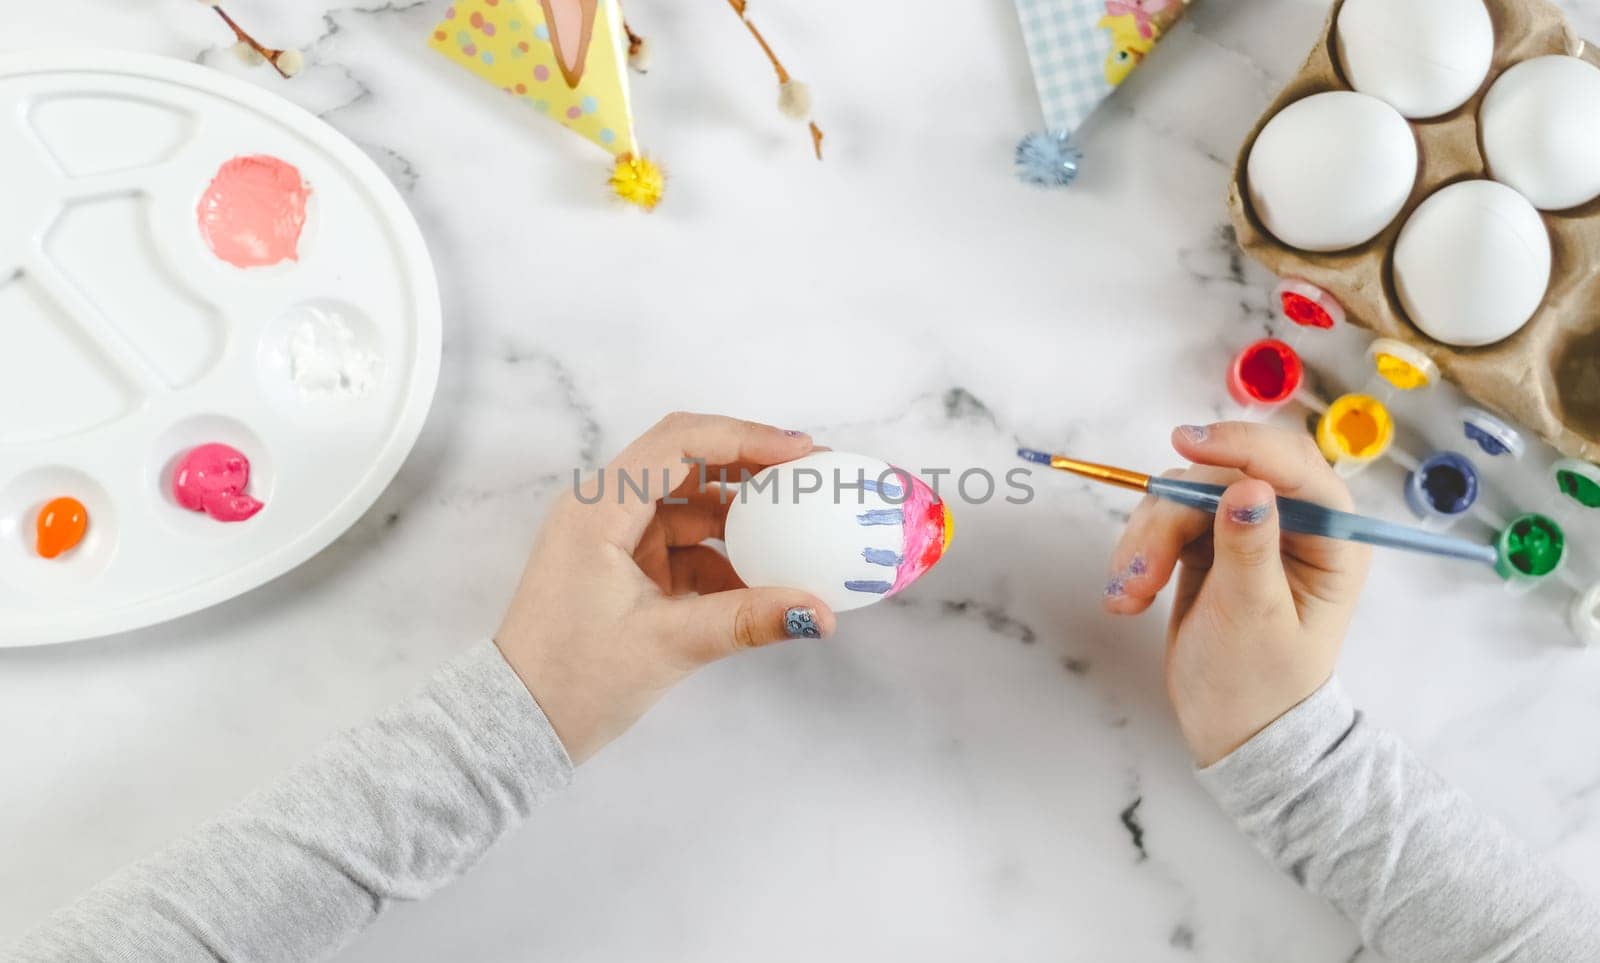 Little caucasian girl paints an easter egg with a brush with blue stripes of acrylic paint, sitting at a marble table with a palette for diy preparation for the easter holiday, flat lay close-up. The concept of crafts, needlework, at home, children art, children creative.